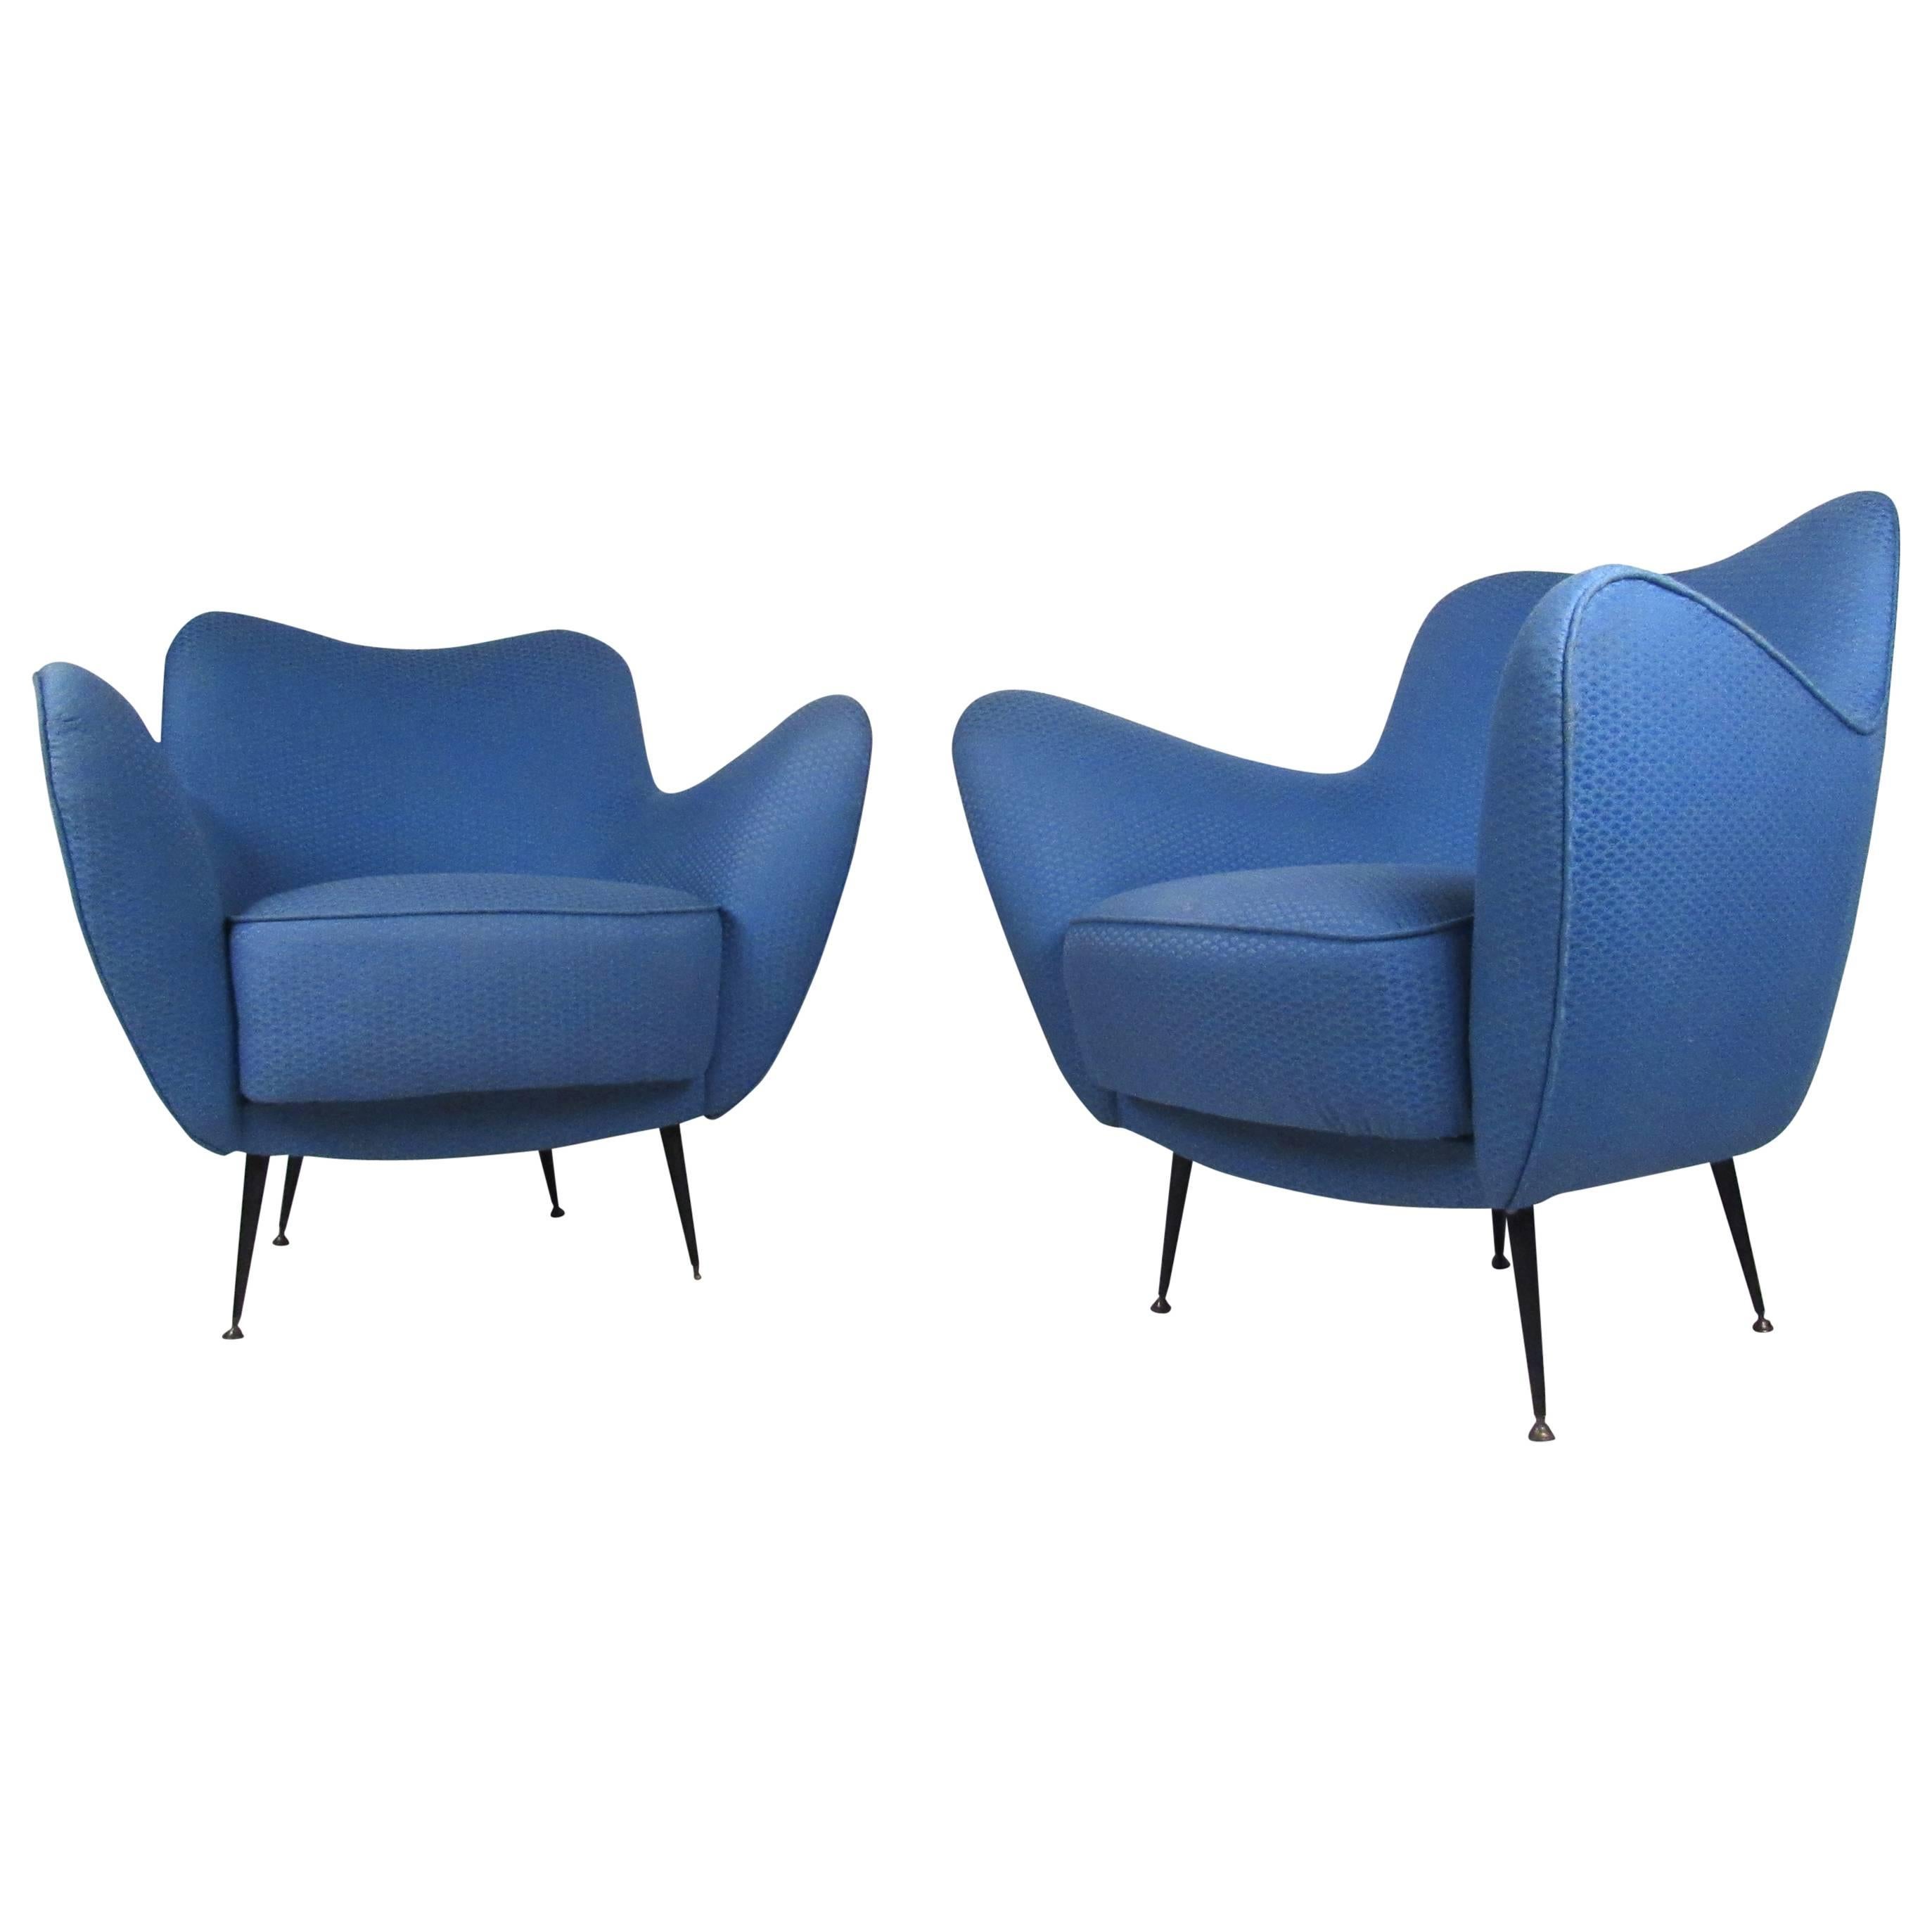 Pair of Italian Modern Sculpted Lounge Chairs